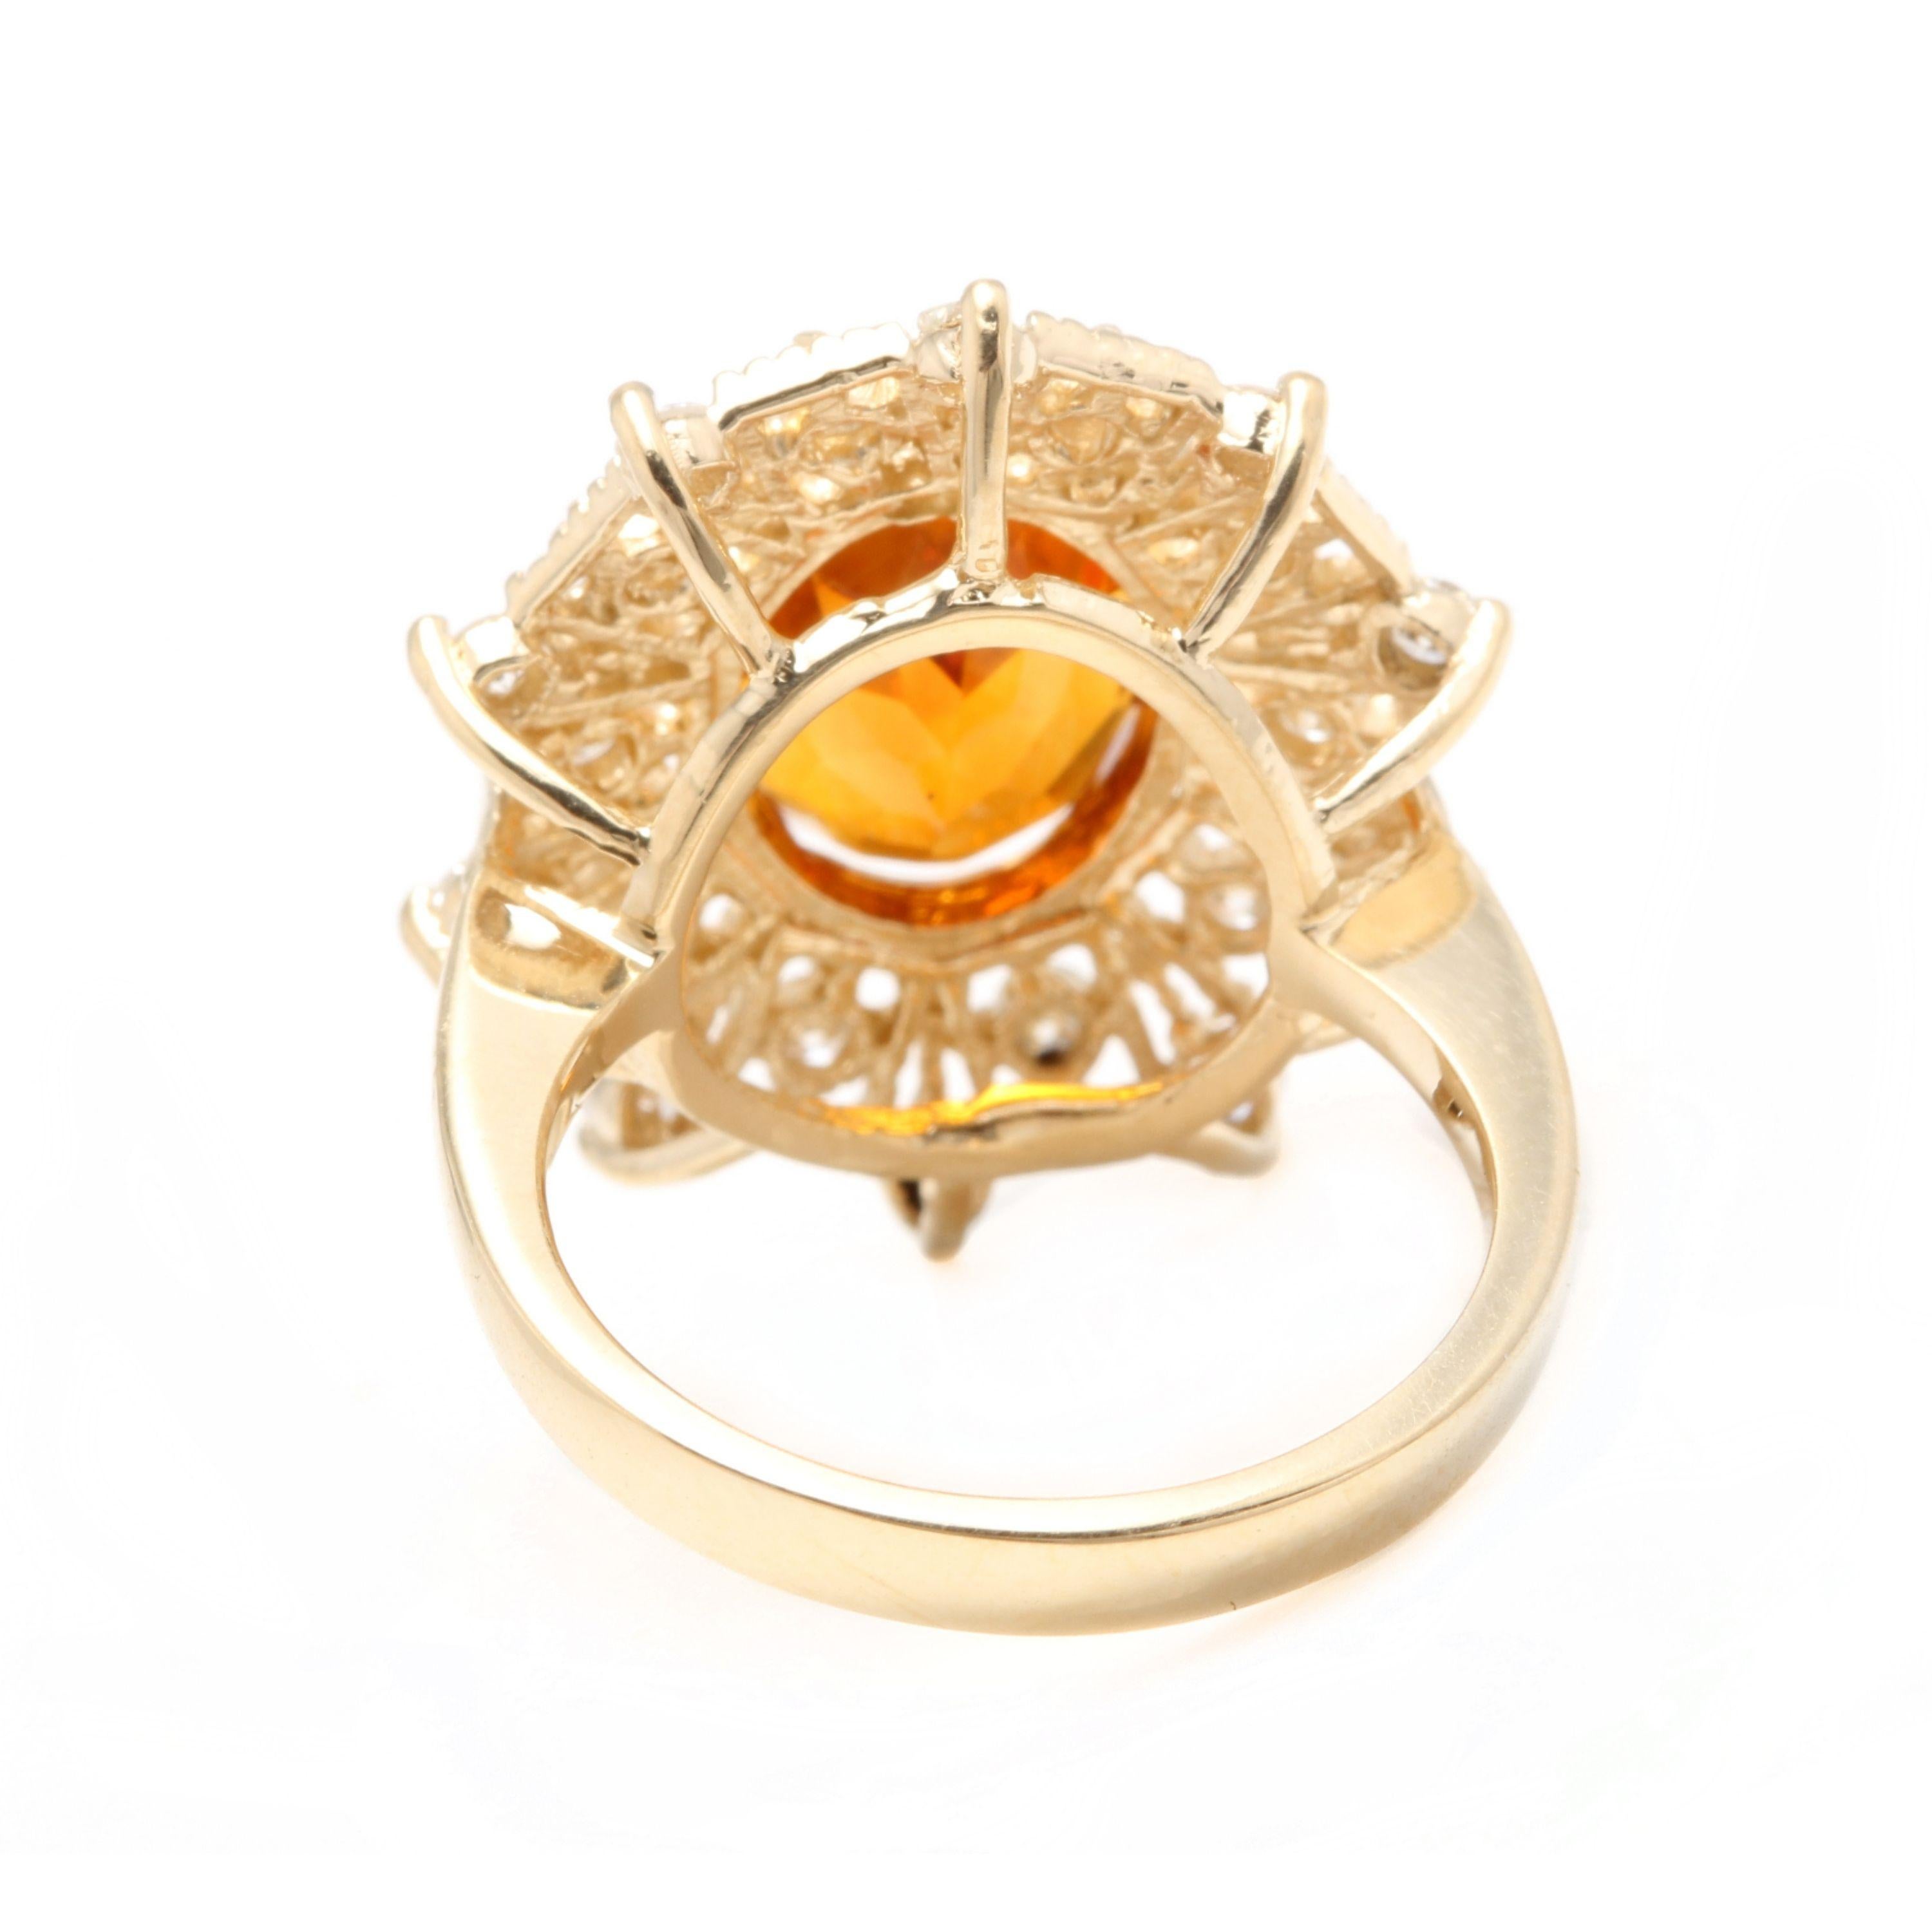 3.75 Carat Natural Madeira Citrine and Diamond 14 Karat Solid Yellow Gold Ring In New Condition For Sale In Los Angeles, CA